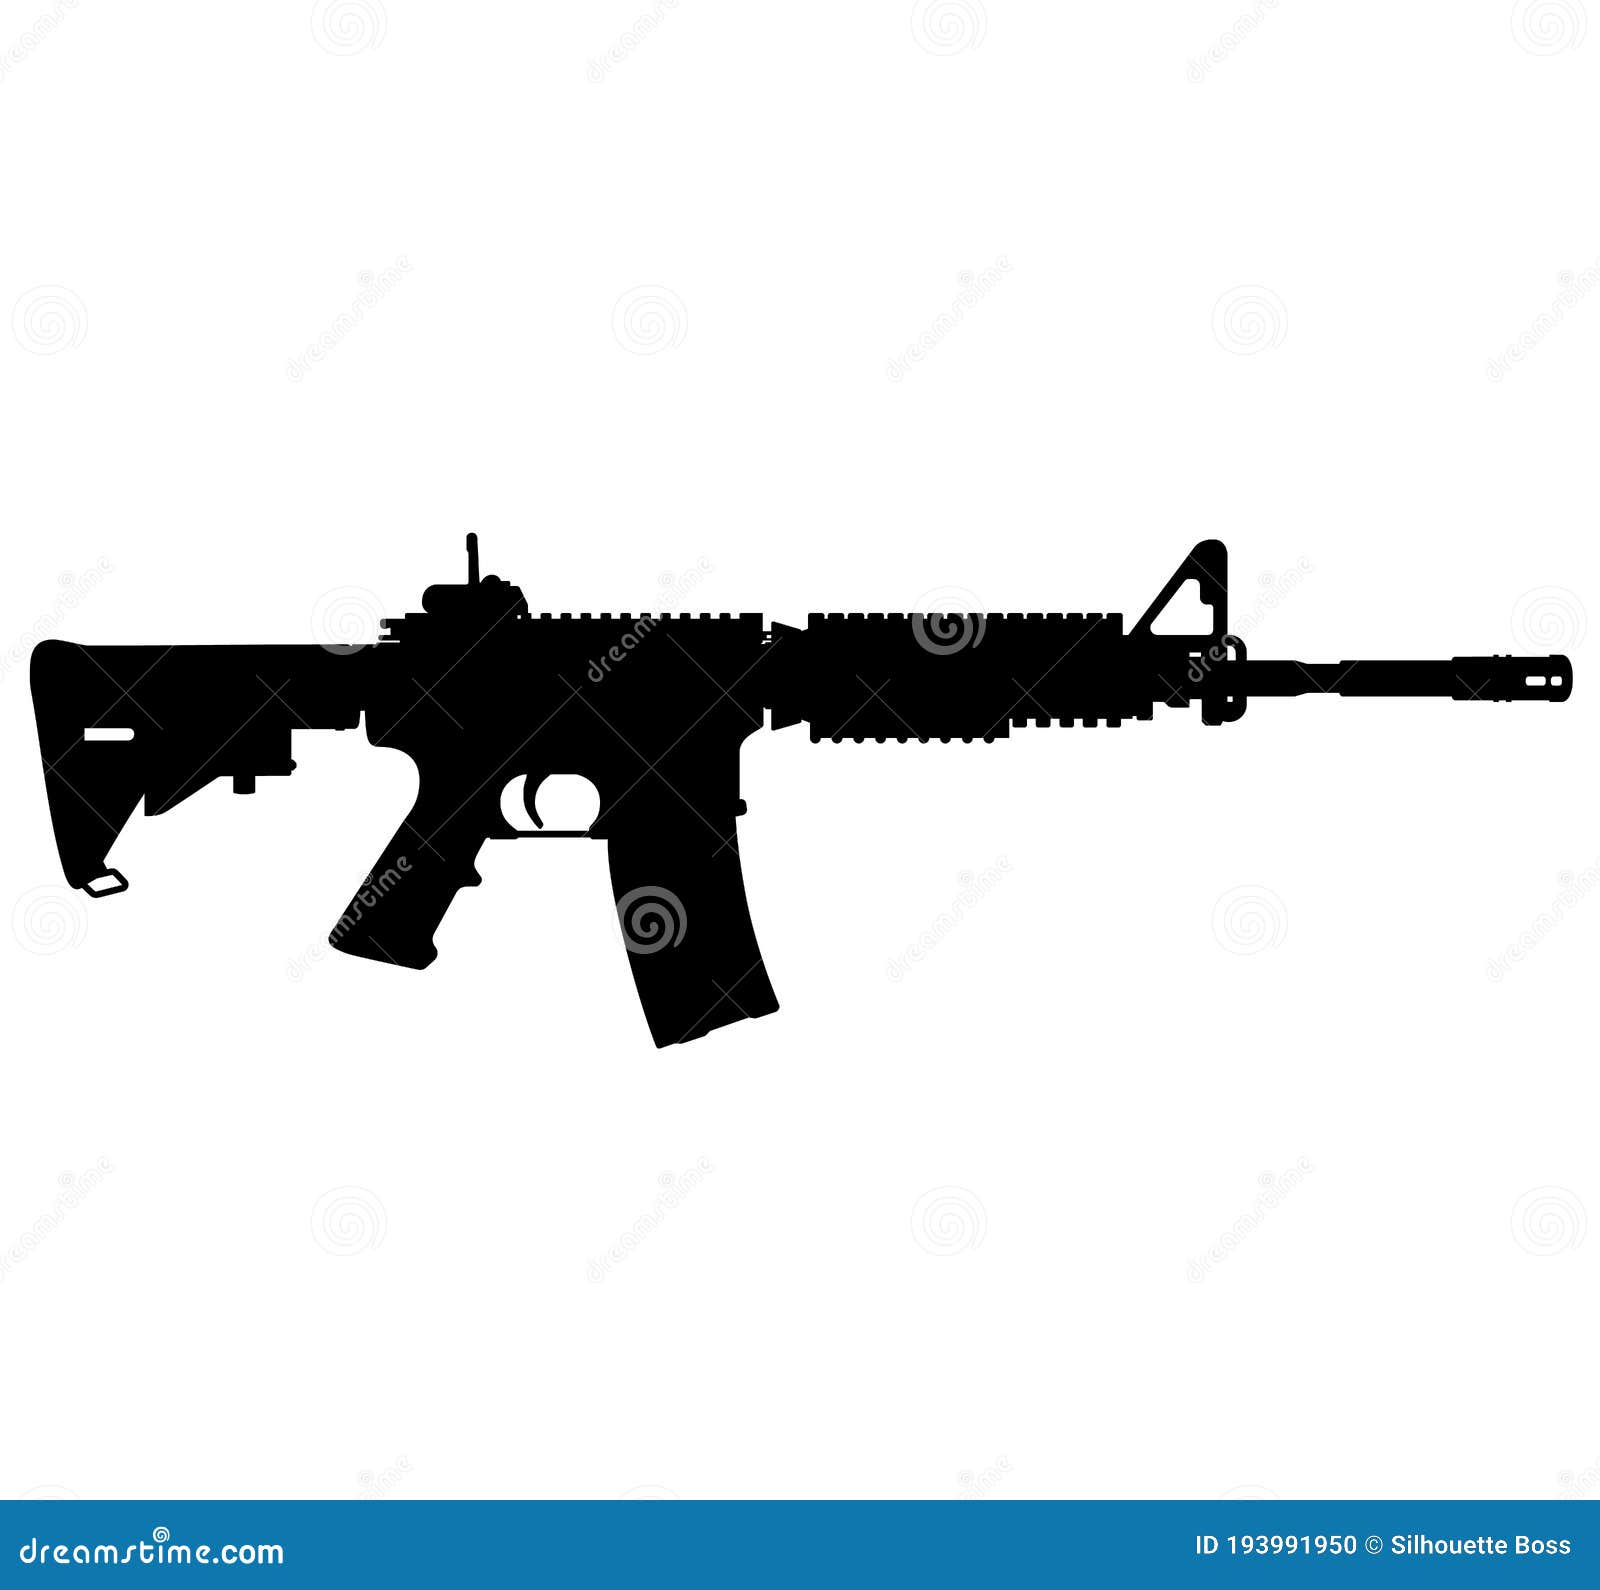 usa united states army, united states armed forces, united states marine corps - police fully automatic machine gun colt m4 / m16